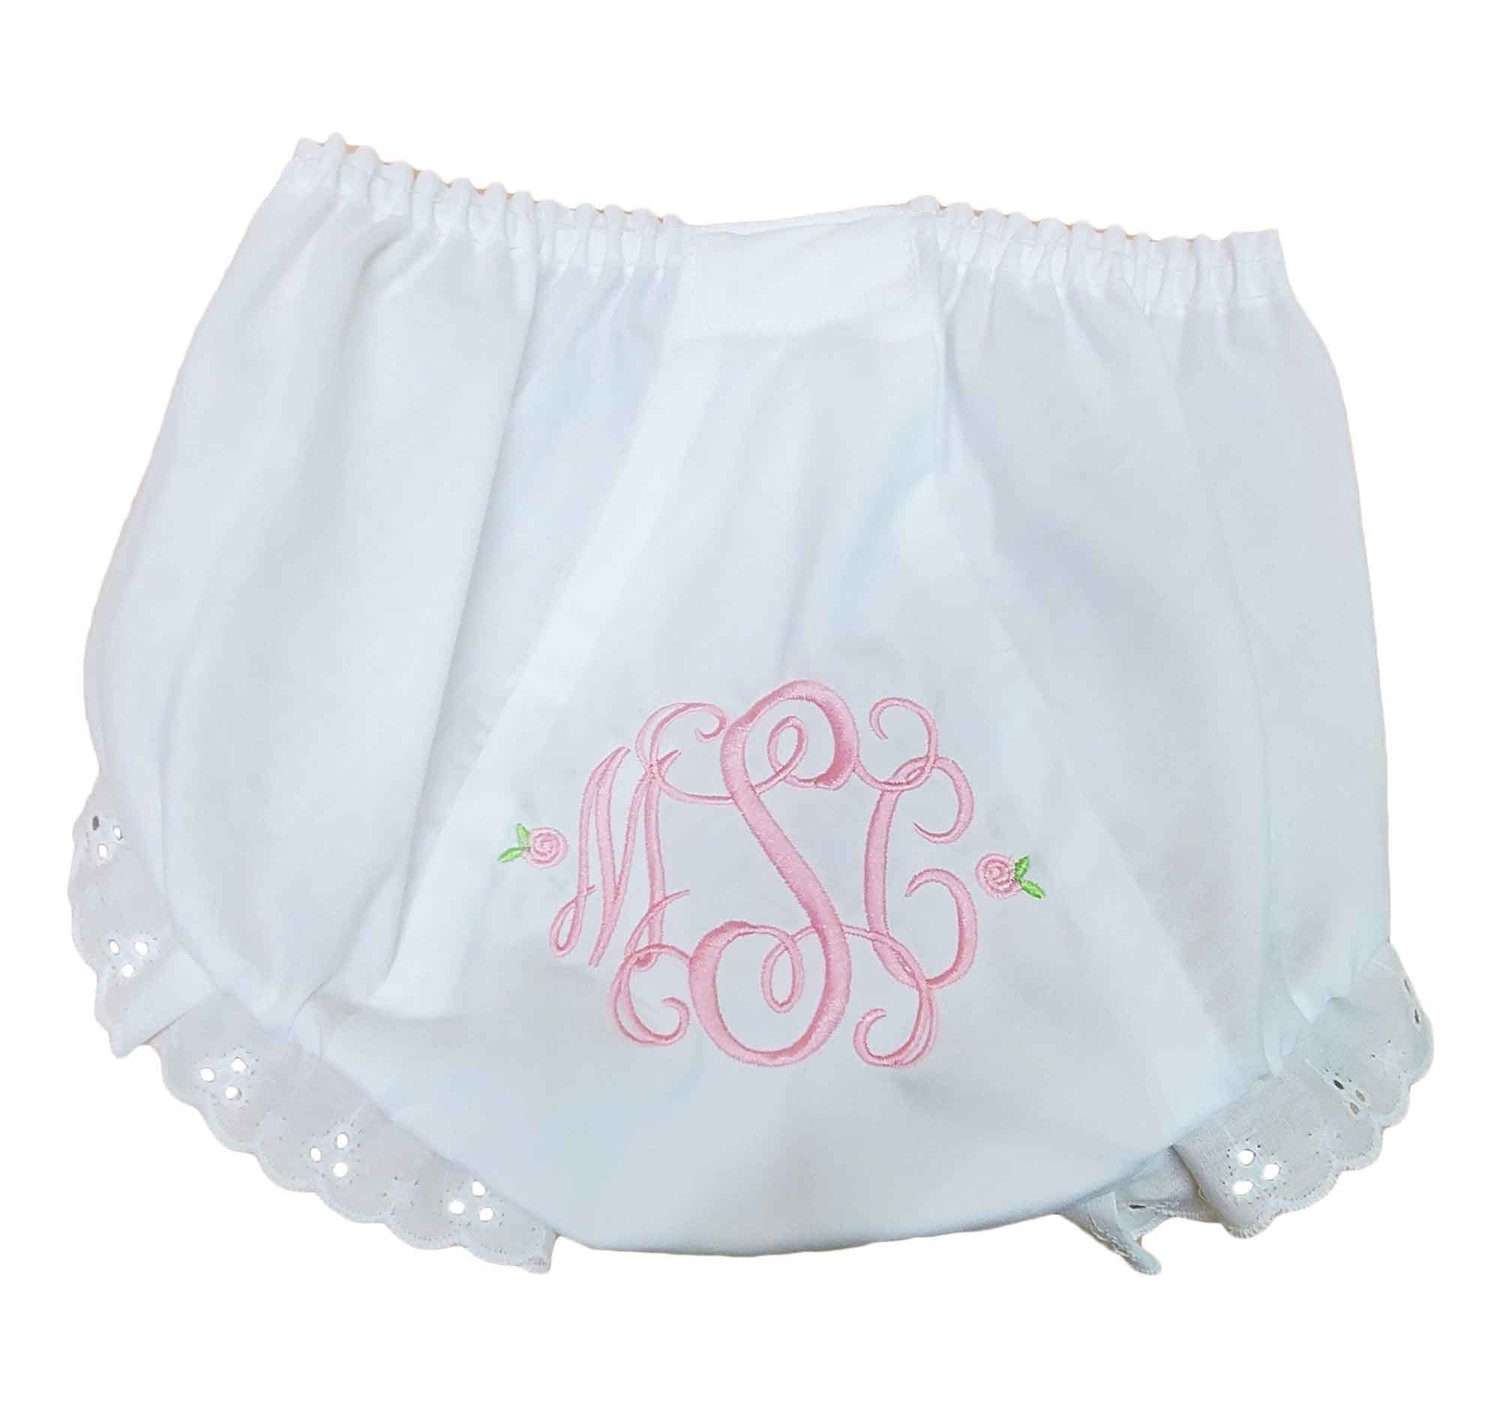 Personalized Monogrammed Diaper Covers Baby Toddler Bloomers Lots of Designs